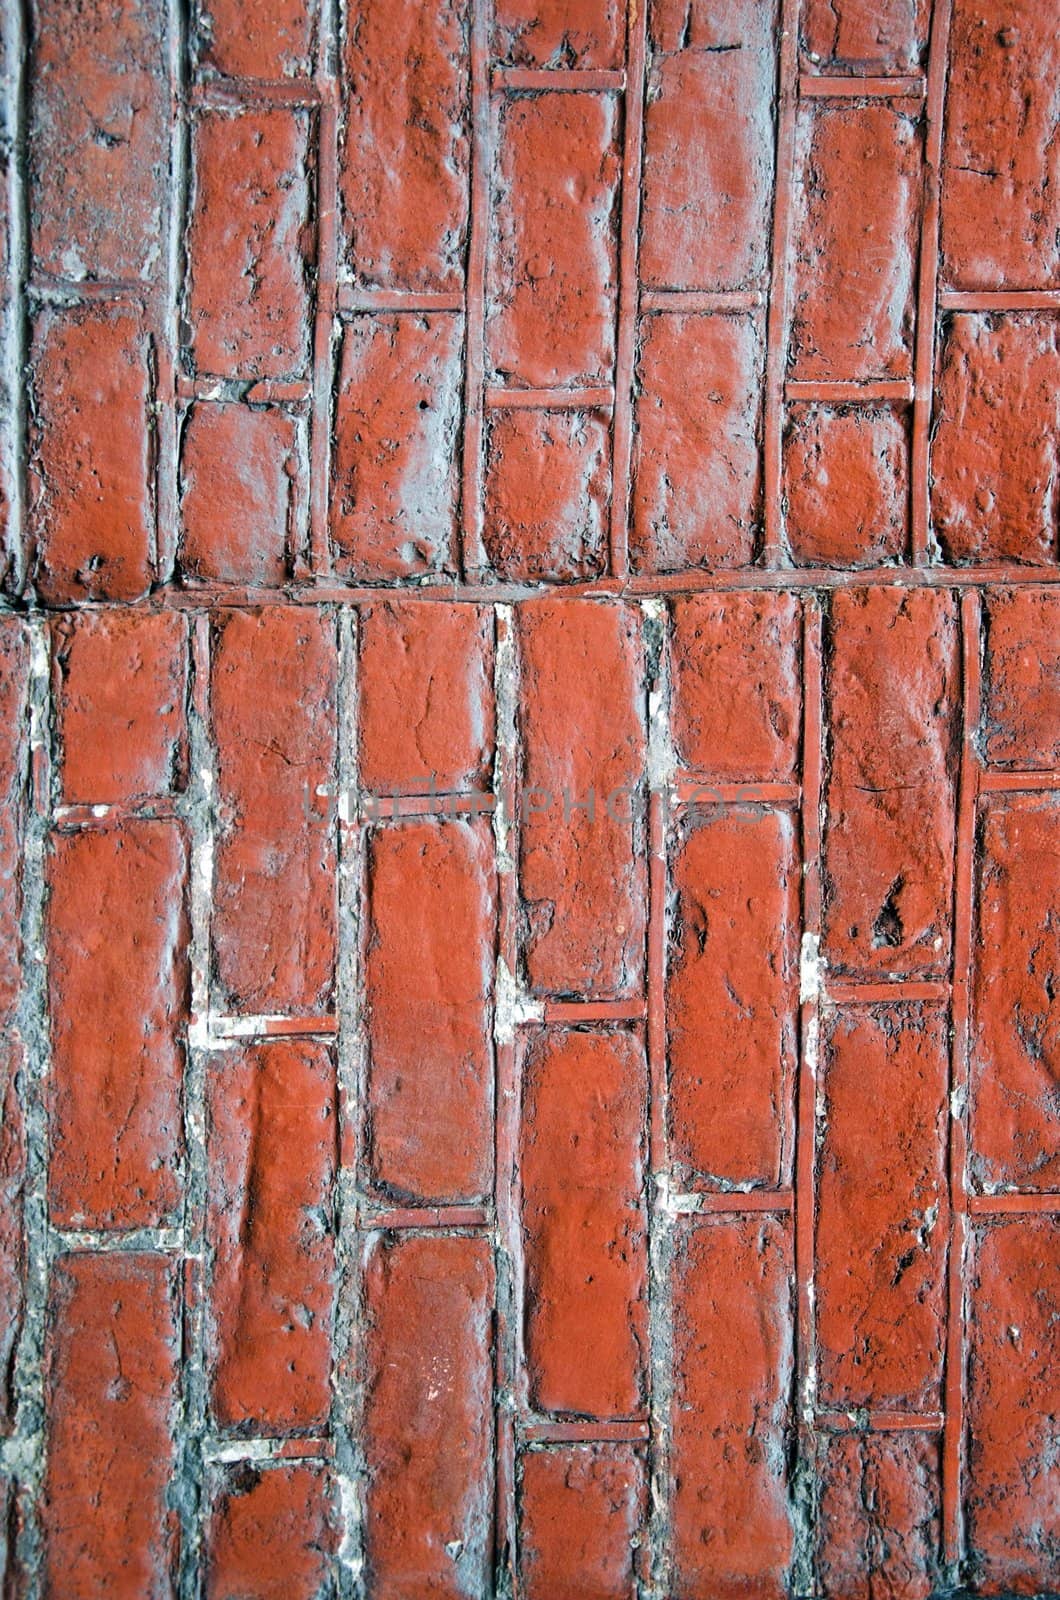 Painted brick wall details architectural background fragment